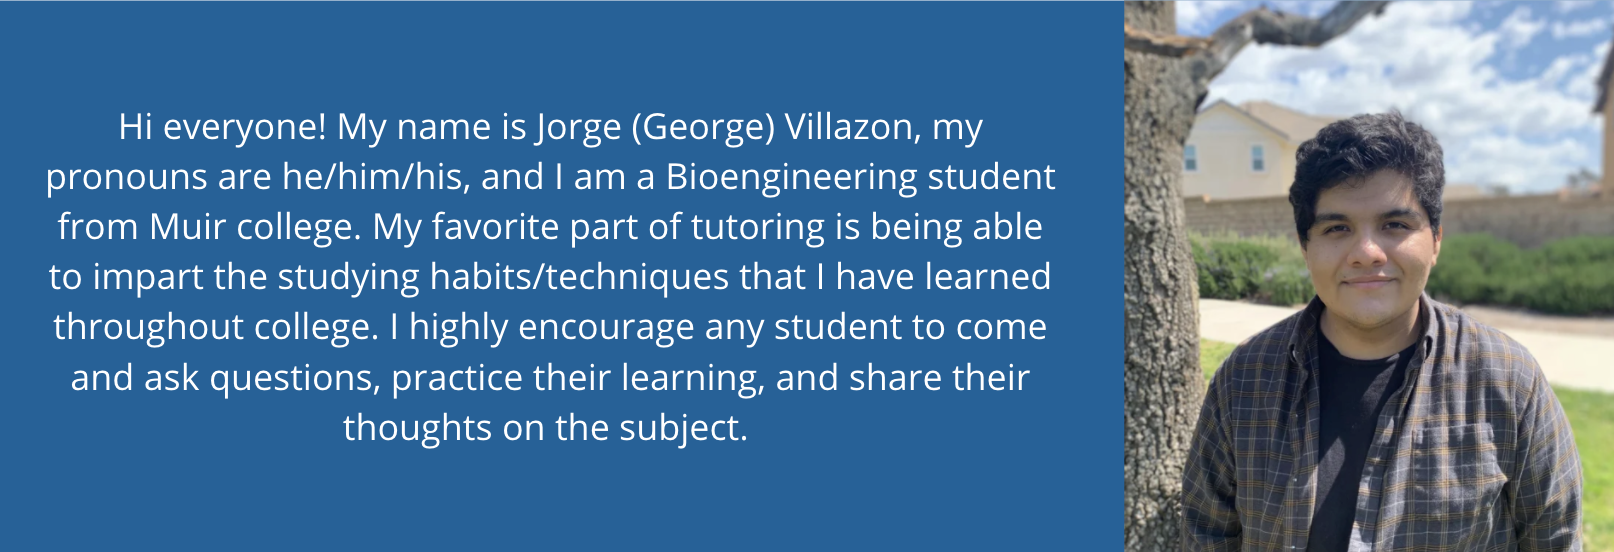 2 of 3, Hi everyone! My name is Jorge (George) Villazon, my pronouns are he/him/his, and I am a Bioengineering student from Muir college. My favorite part of tutoring is being able to impart the studying habits/techniques that I have learned throughout college. I highly encourage any student to come and ask questions, practice their learning, and share their thoughts on the subject. 